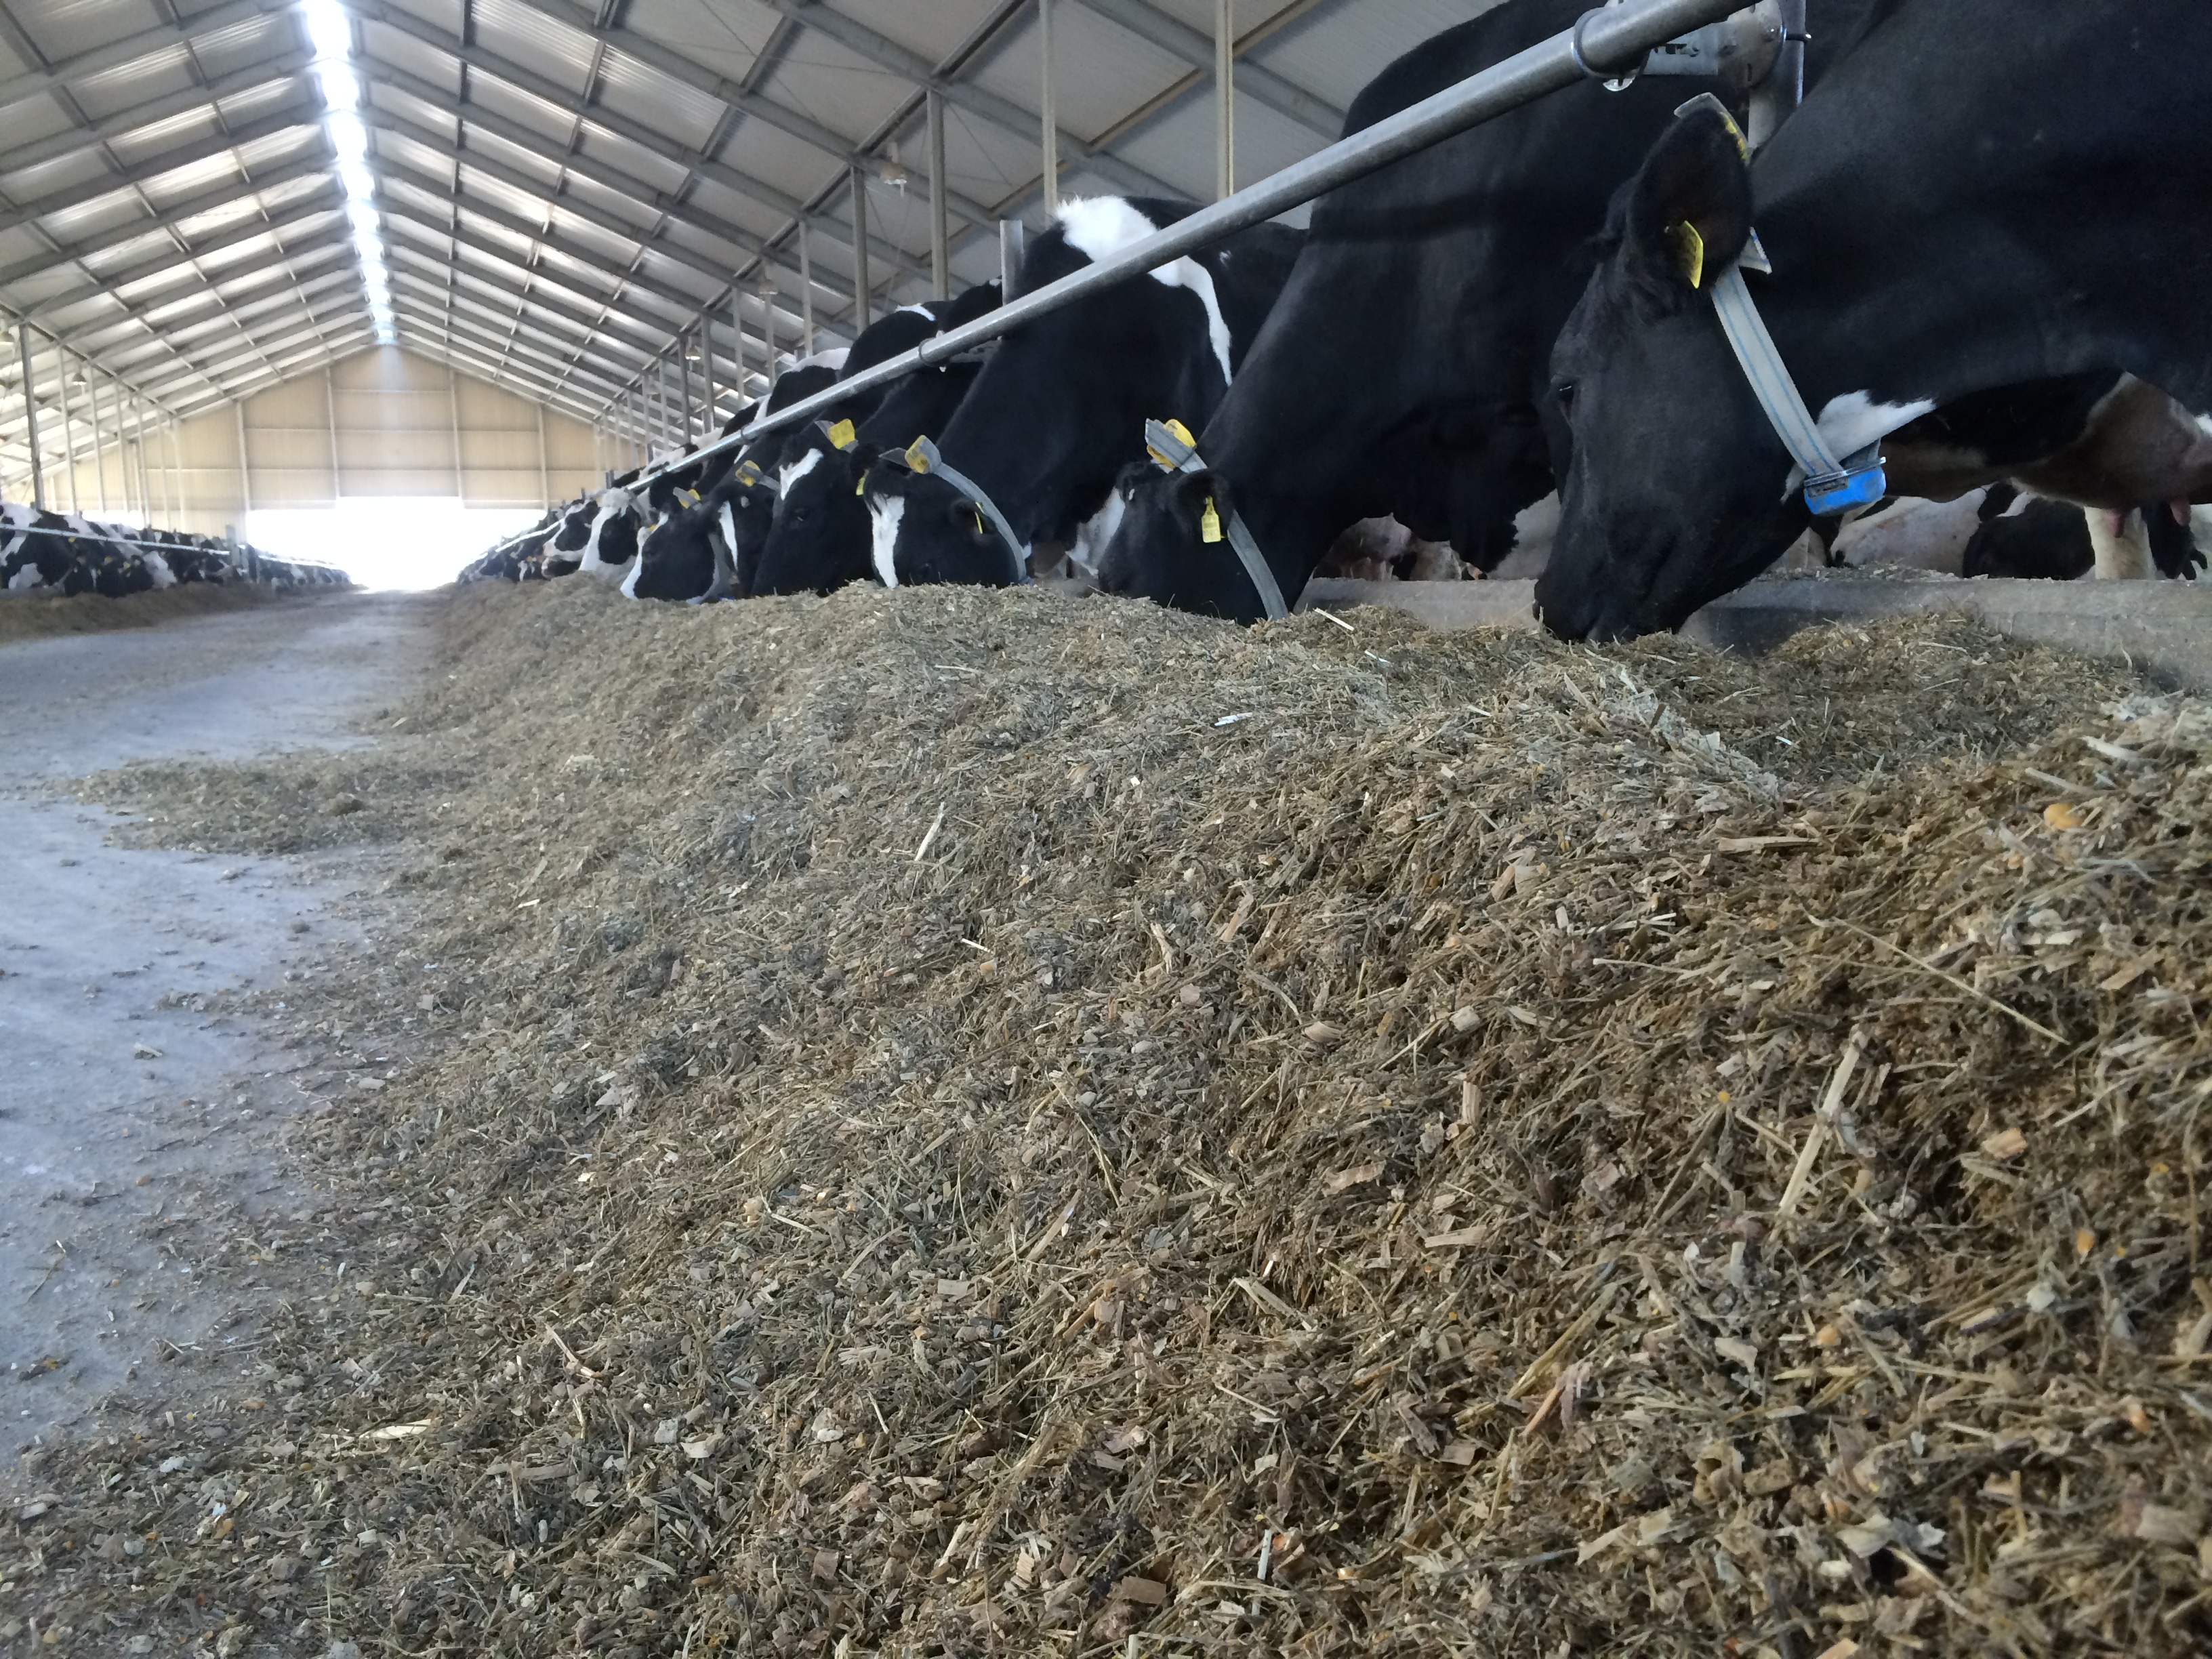 Cows are fed maize silage, which is a great cattle feeding product. 